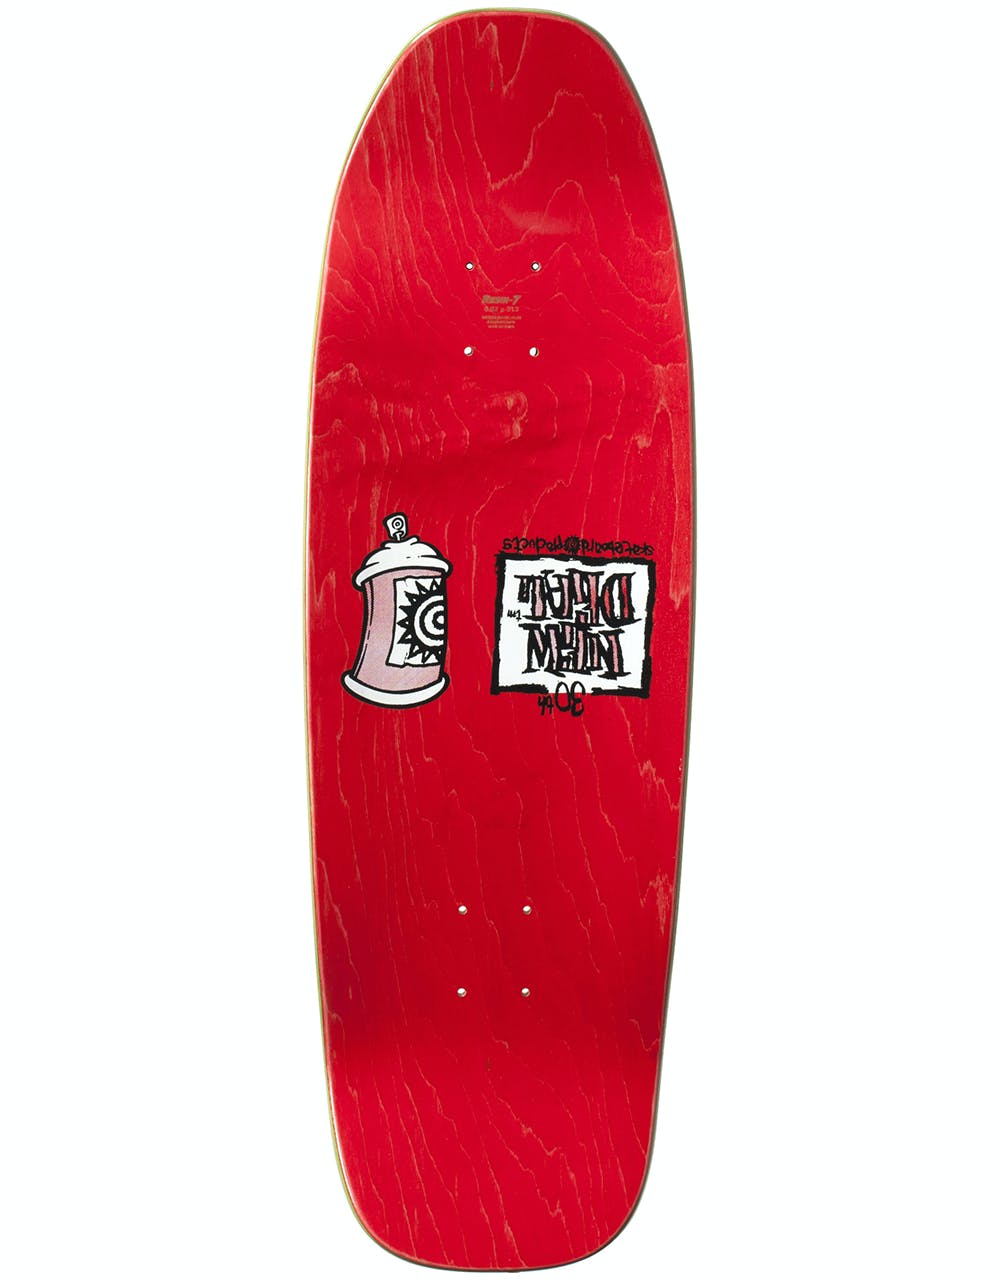 The New Deal Siamese Double Kick SP Skateboard Deck - 9.625"